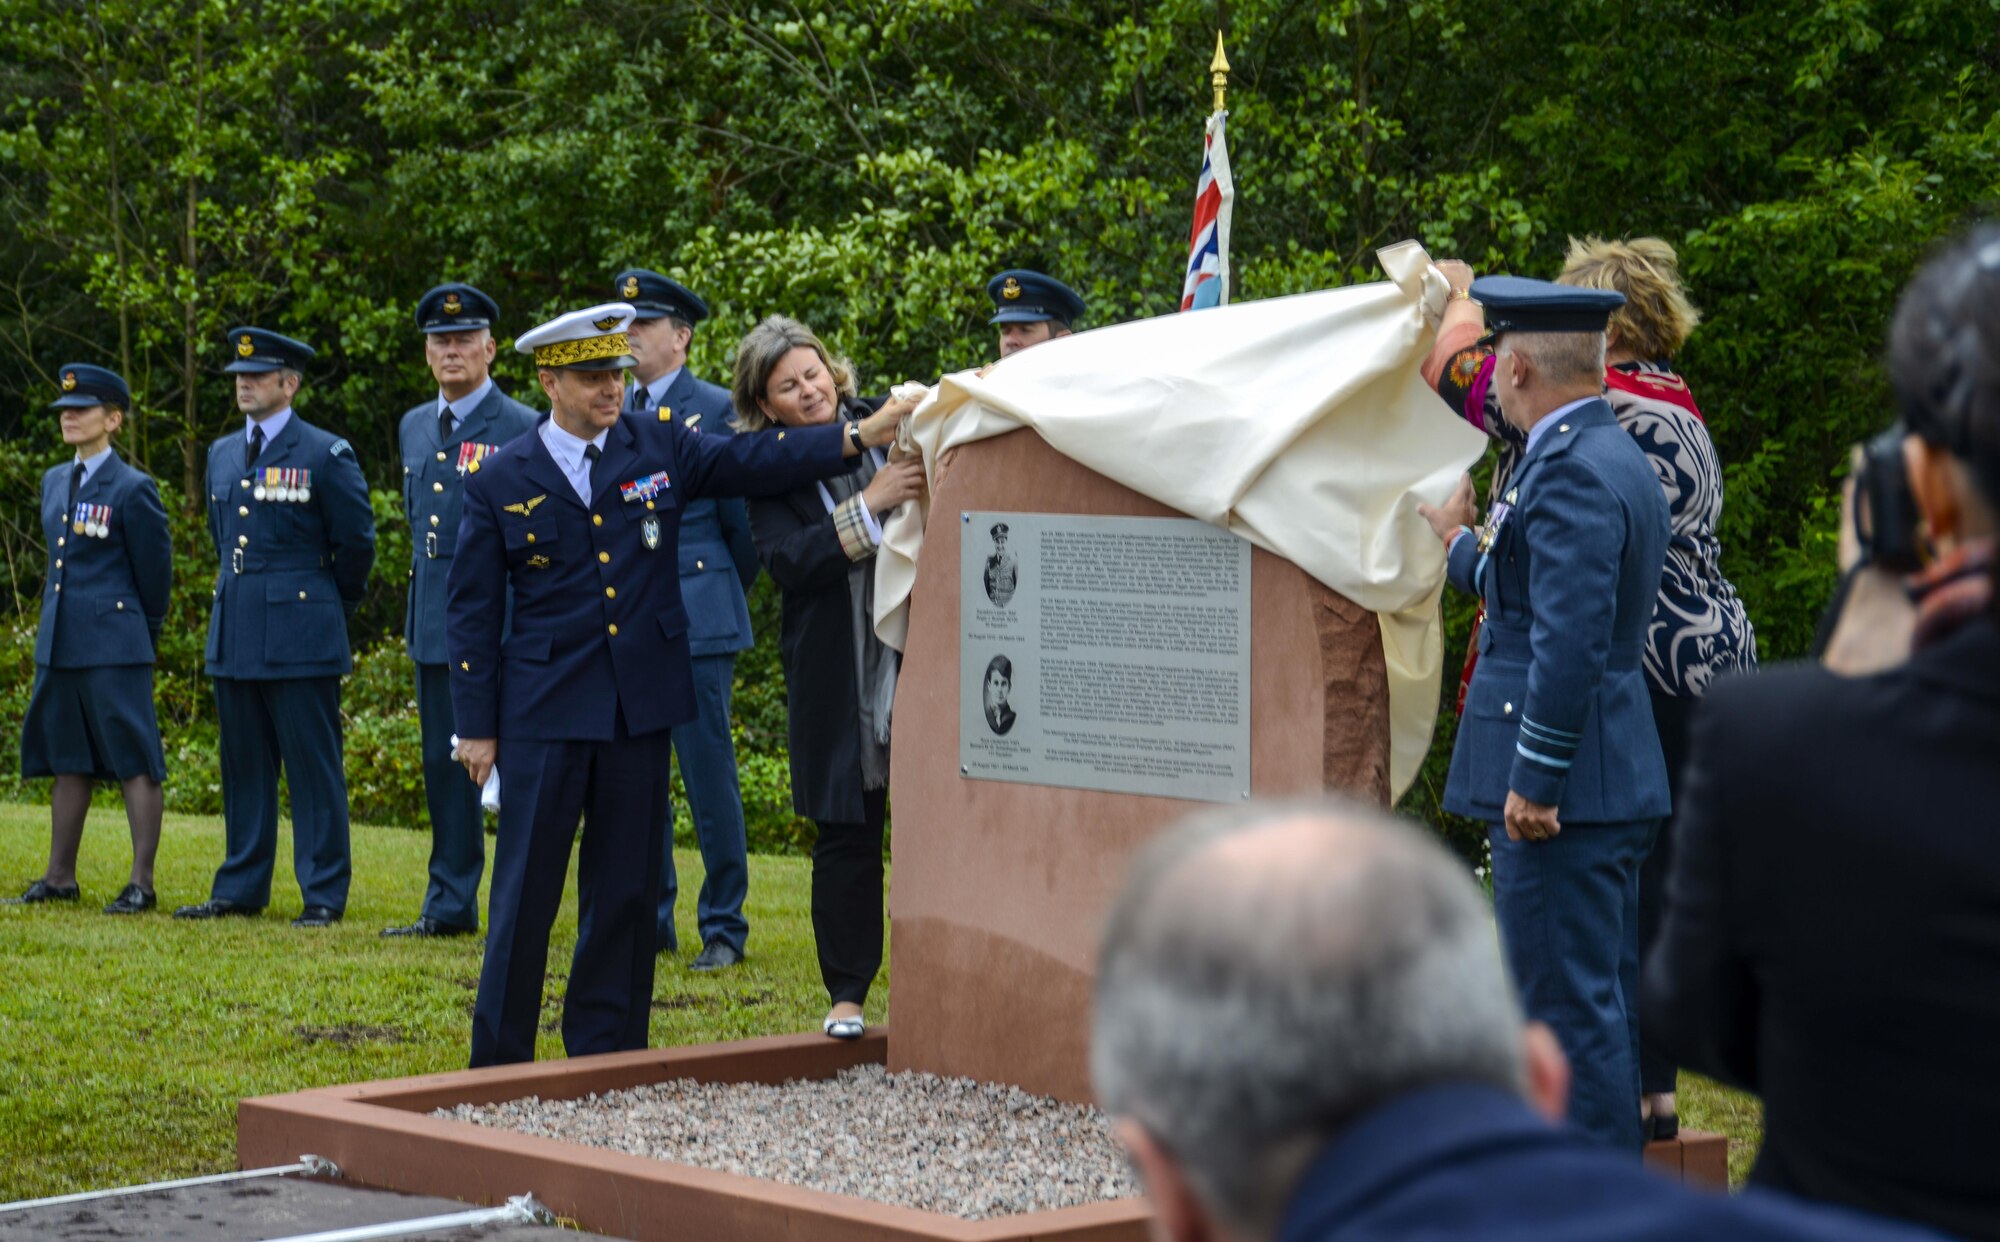 Members of the French and Royal Air Forces assist family members of Squadron Leader Roger Bushell, Royal Air Force, and Sous-Lieutenant Bernard Scheidhauer, Free French Air Force, unveil the memorial dedicated to the two men outside the West Gate of Ramstein Air Base, Germany, July 1, 2017. The two airmen were the masterminds behind the “Great Escape” that took place March 24, 1944. During the Escape, 76 Allied airmen escaped from the prisoner of war camp Stalag Luft III at Żagań, Poland. Although, they only made it as far as Saarbrücken, Germany, they were arrested on March 26, and interrogated. On March 29, under the pretext of being returned to their prison camp, Bushell and Scheidhauer were driven to a bridge near Ramstein and killed. Throughout the following days, 48 of their fellow escapees were executed. The commemorative stone was made possible through the support and efforts of the German, U.S., British, and French communities. (U.S. Air Force photo by Staff Sgt. Timothy Moore)